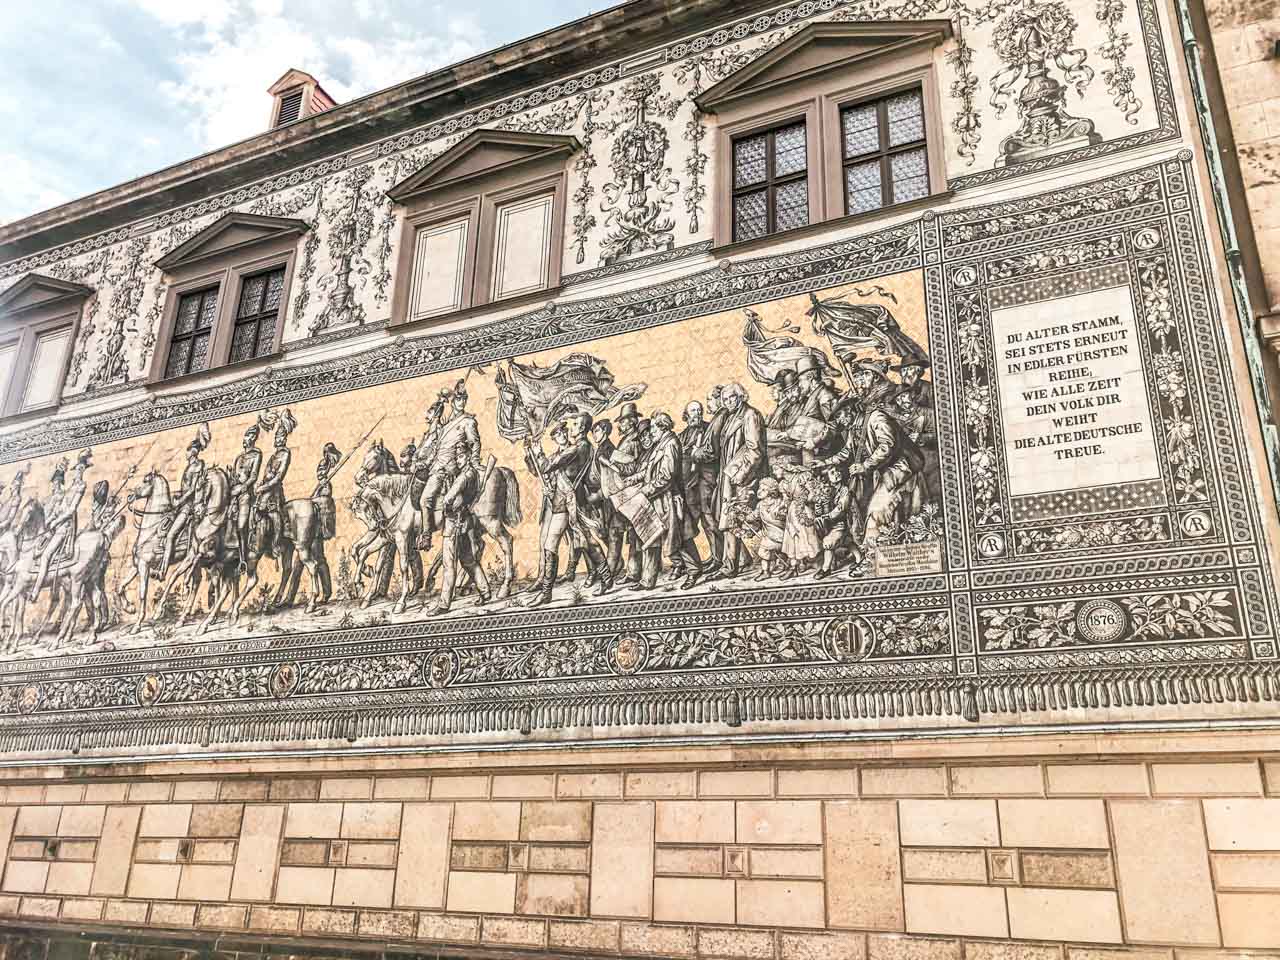 Fürstenzug in Dresden, Germany - a mural depicting a procession of the rulers of Saxony